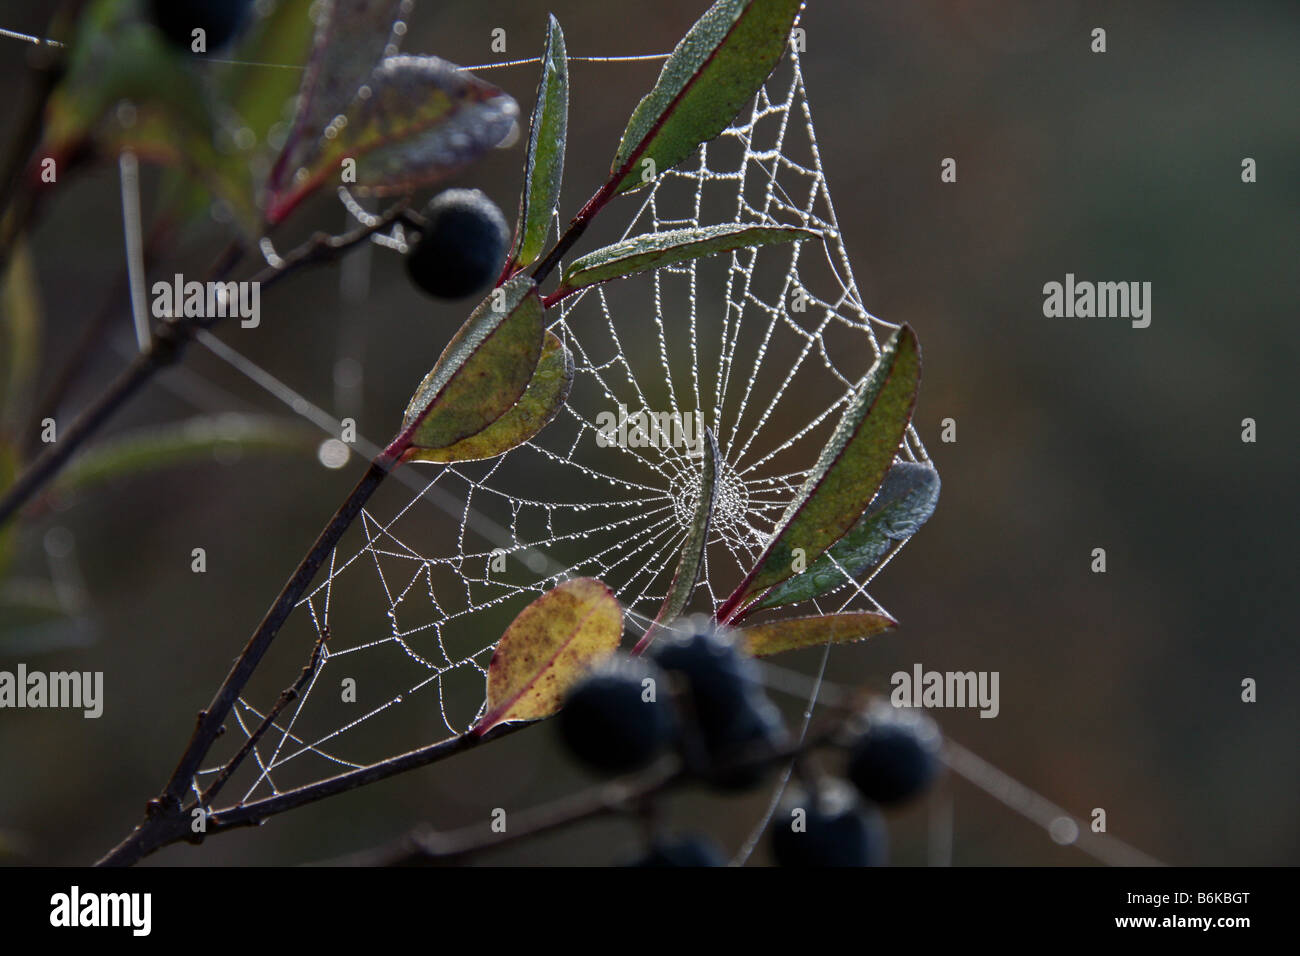 A cobweb decorated with dew drops between berry bushes. Stock Photo